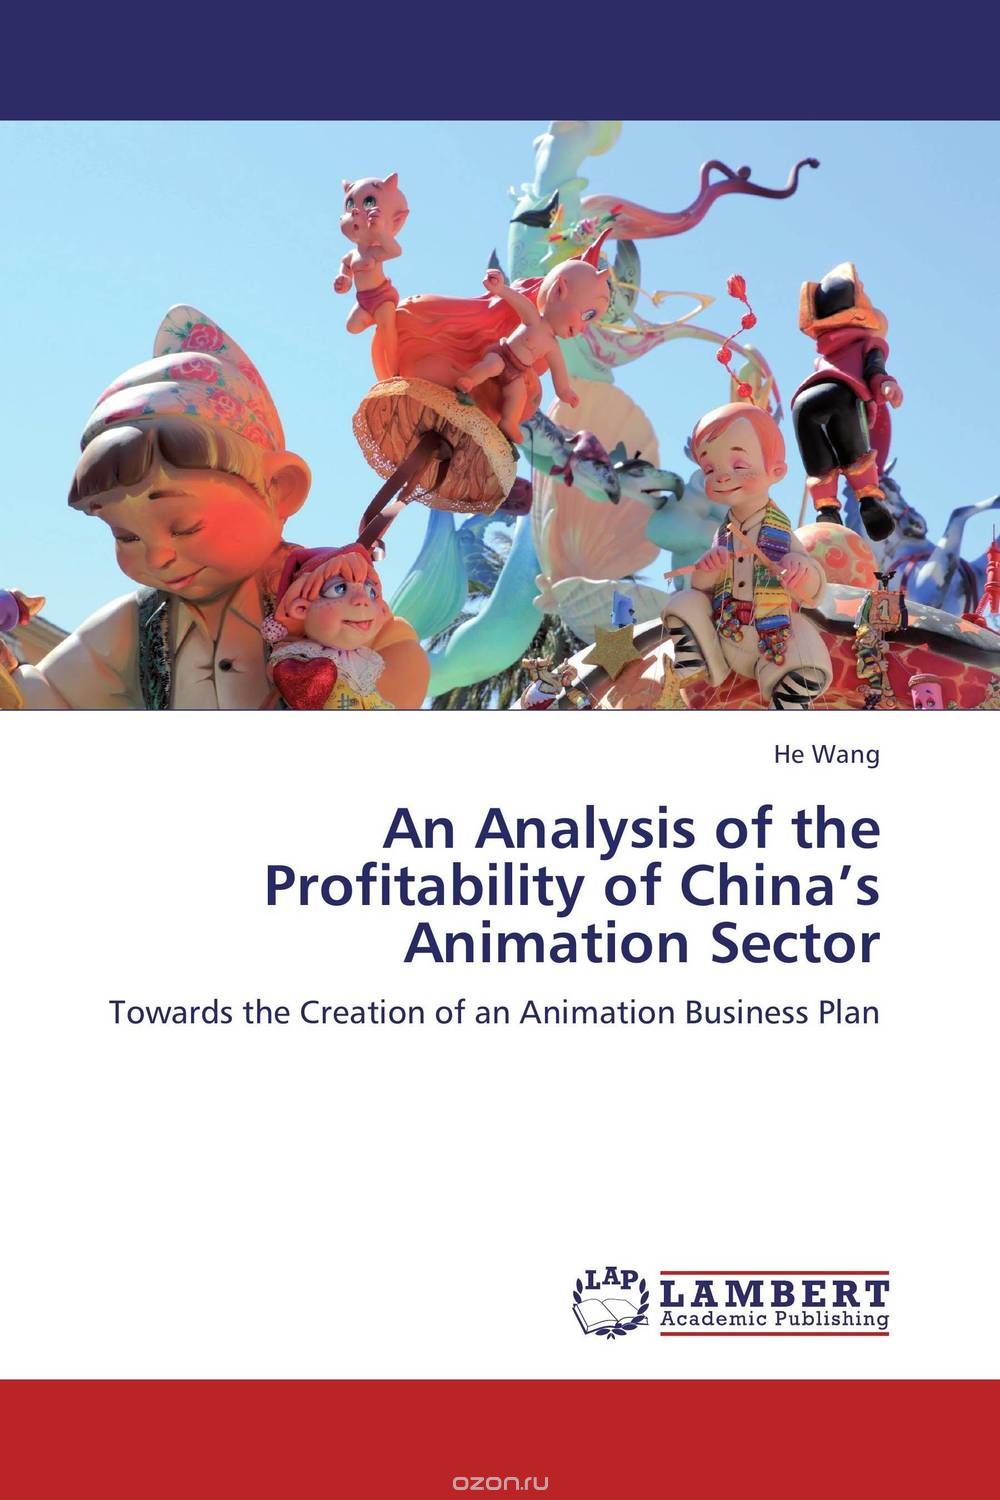 An Analysis of the Profitability of China’s Animation Sector